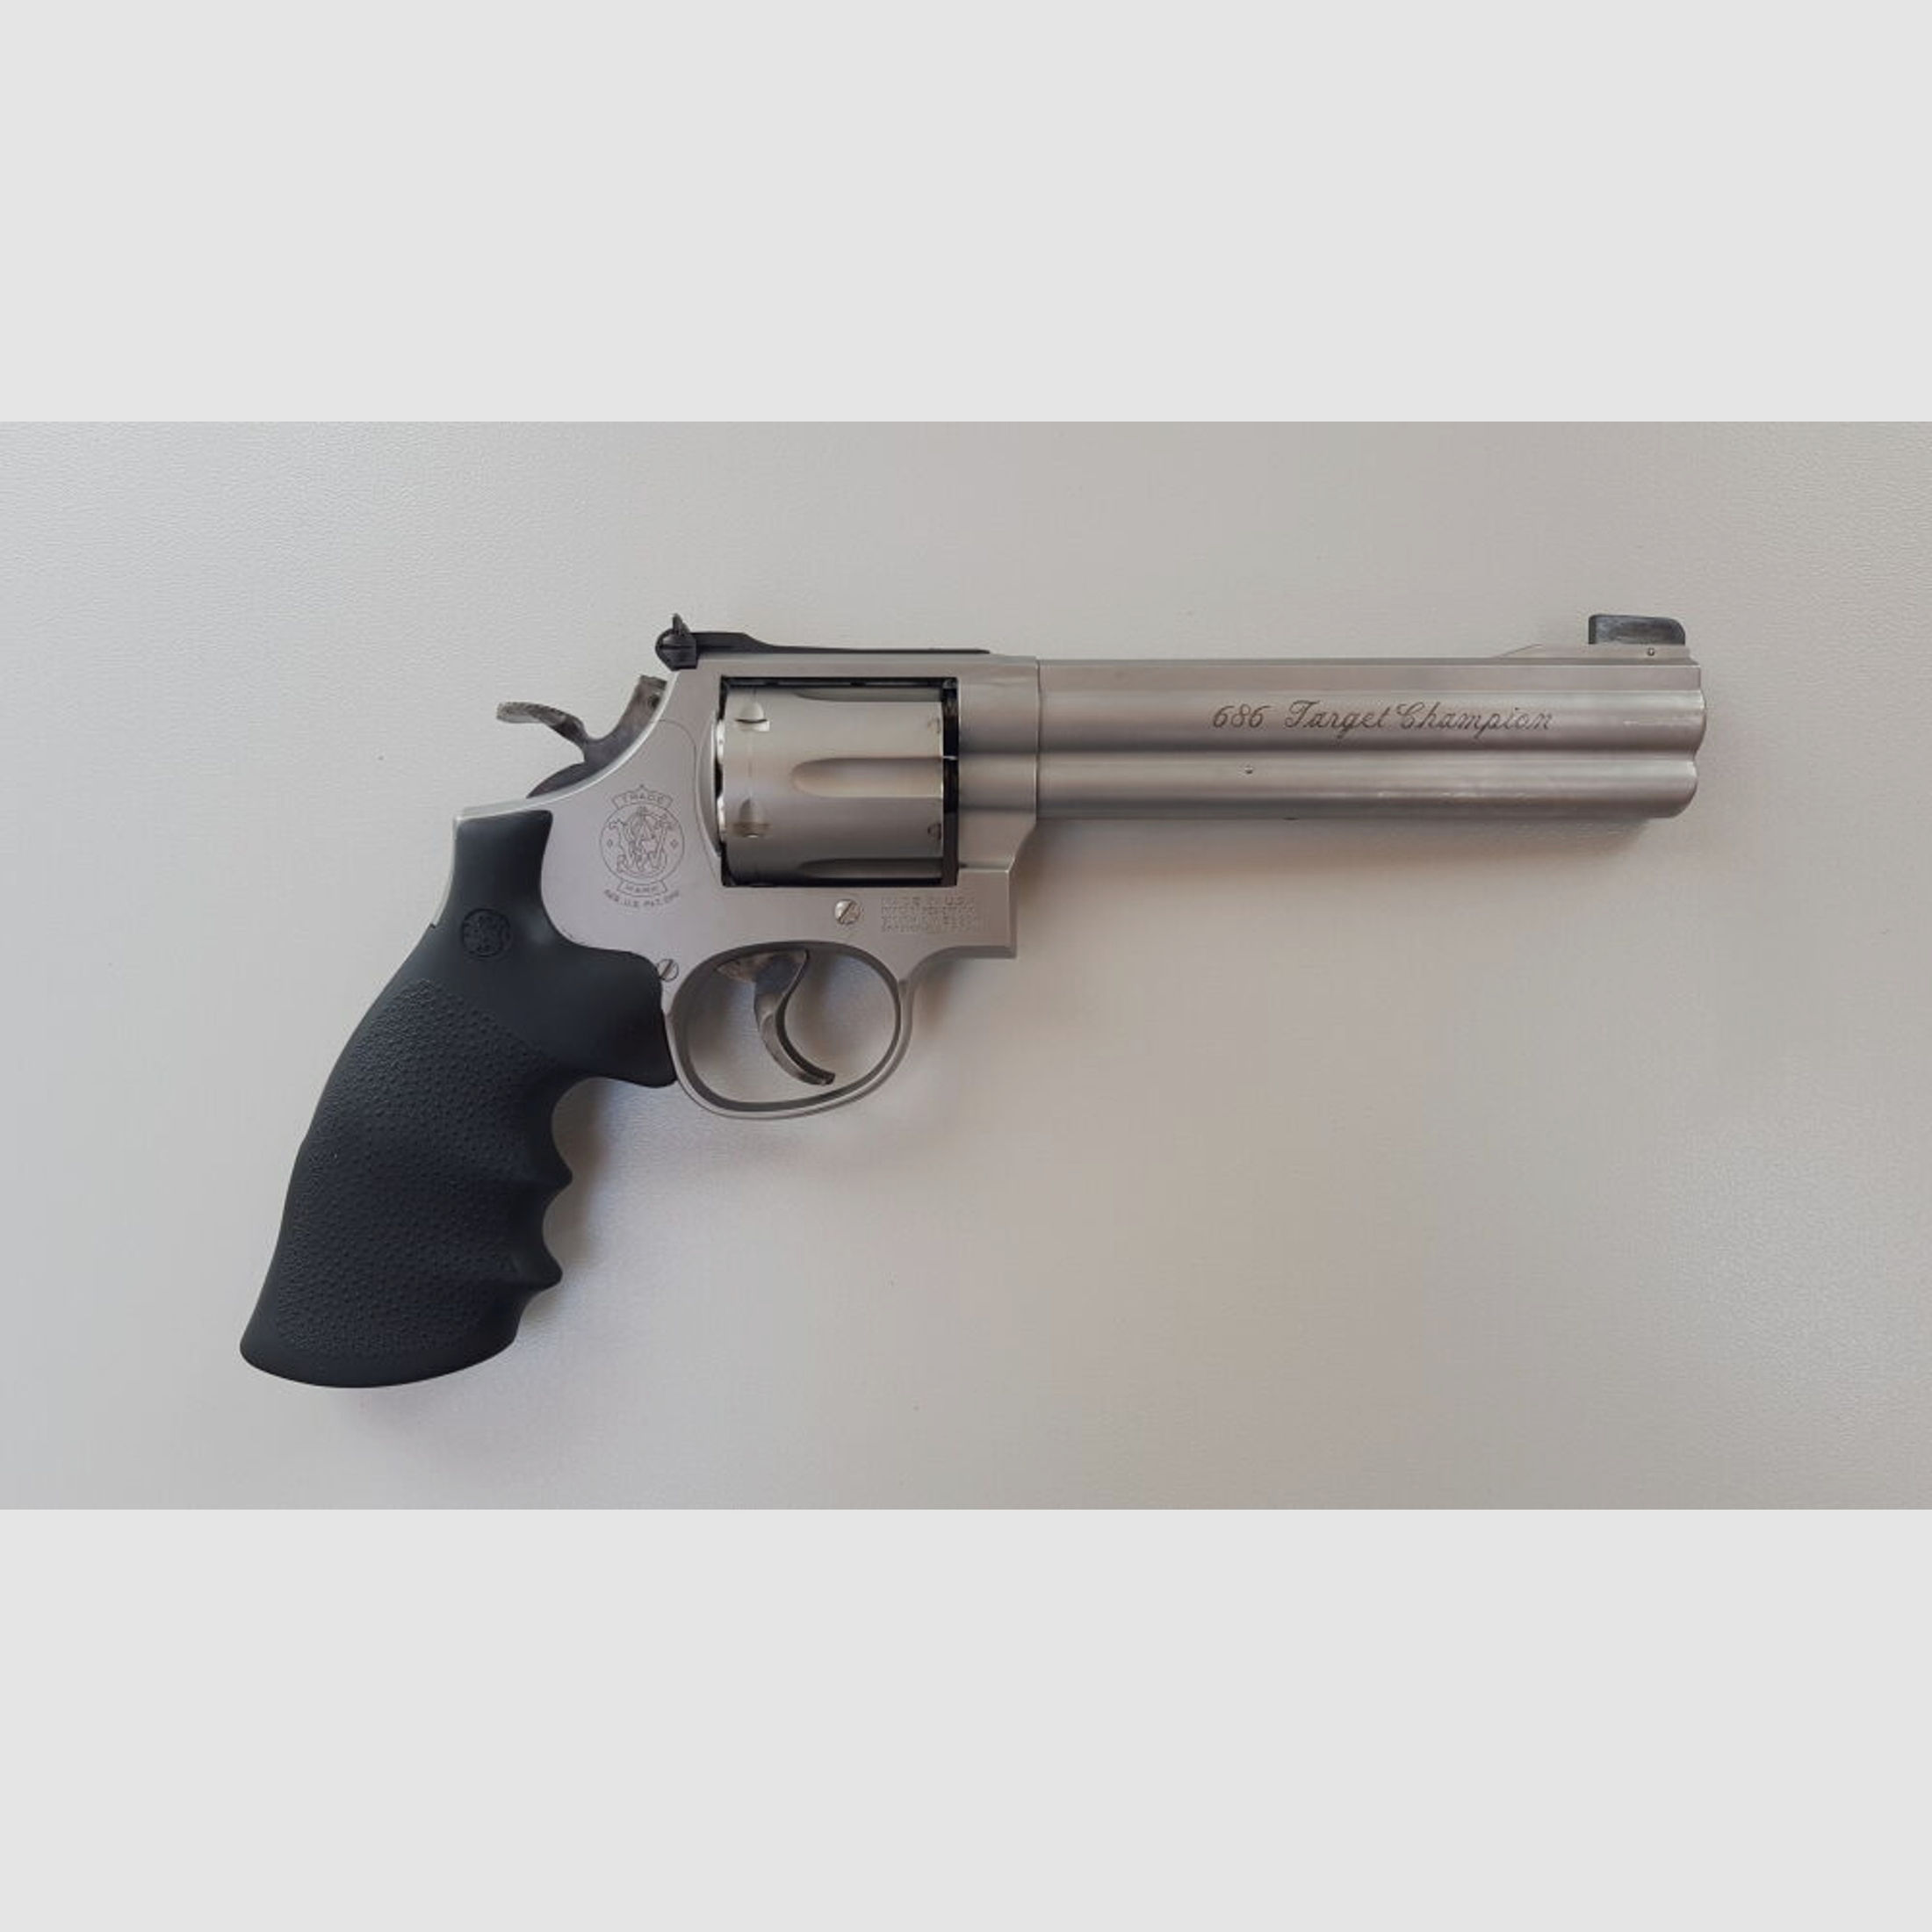 S&W Smith & Wesson	 S&W Revolver Mod. 686-4 .357 Mag. Target Champion